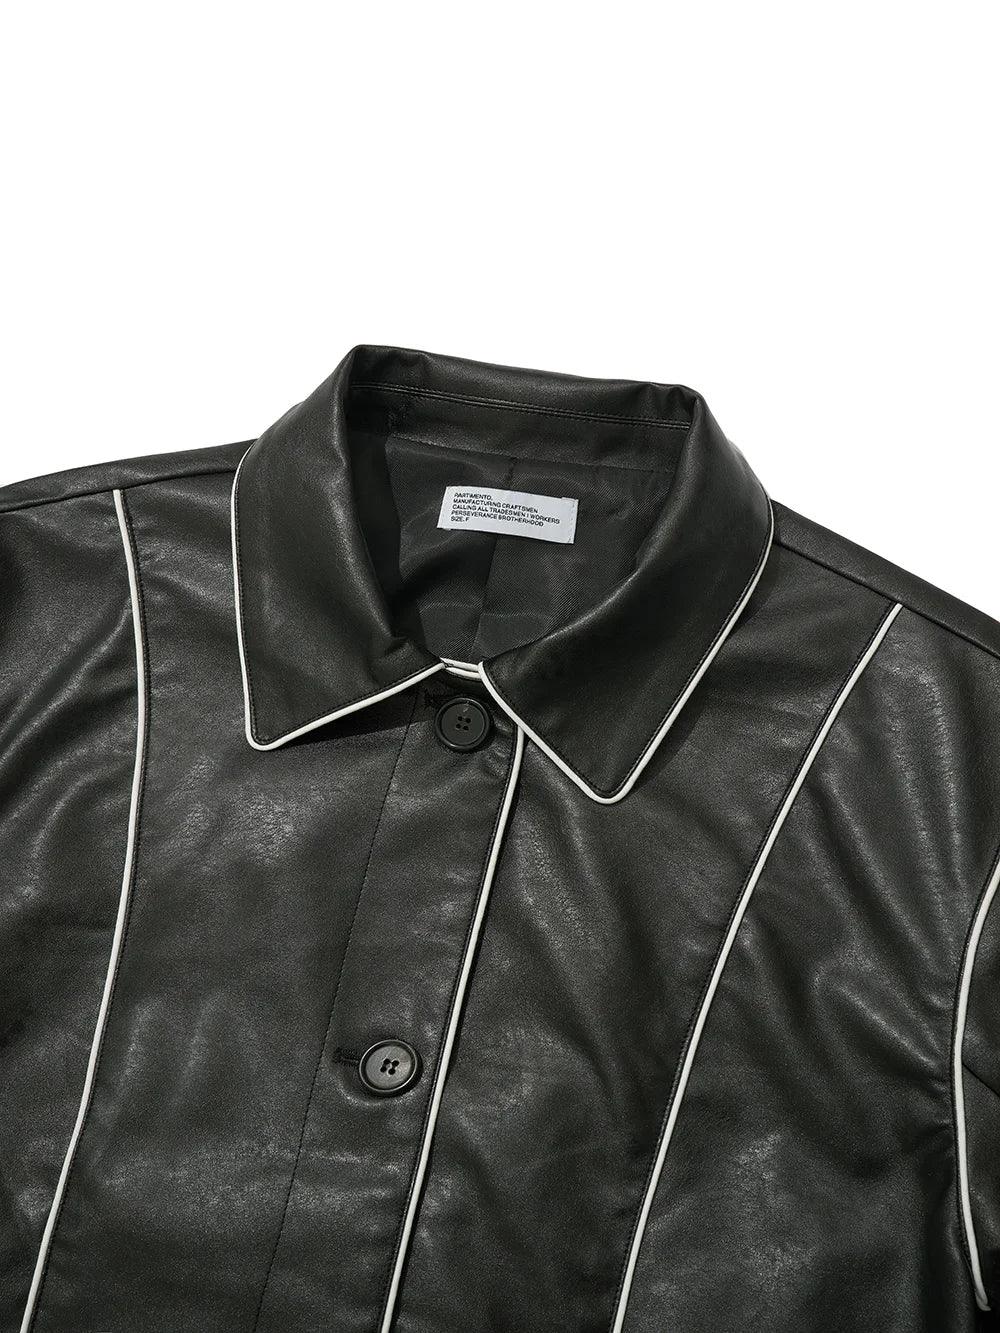 Partimento Piping Point Vegan Leather Car Coat- Black - One